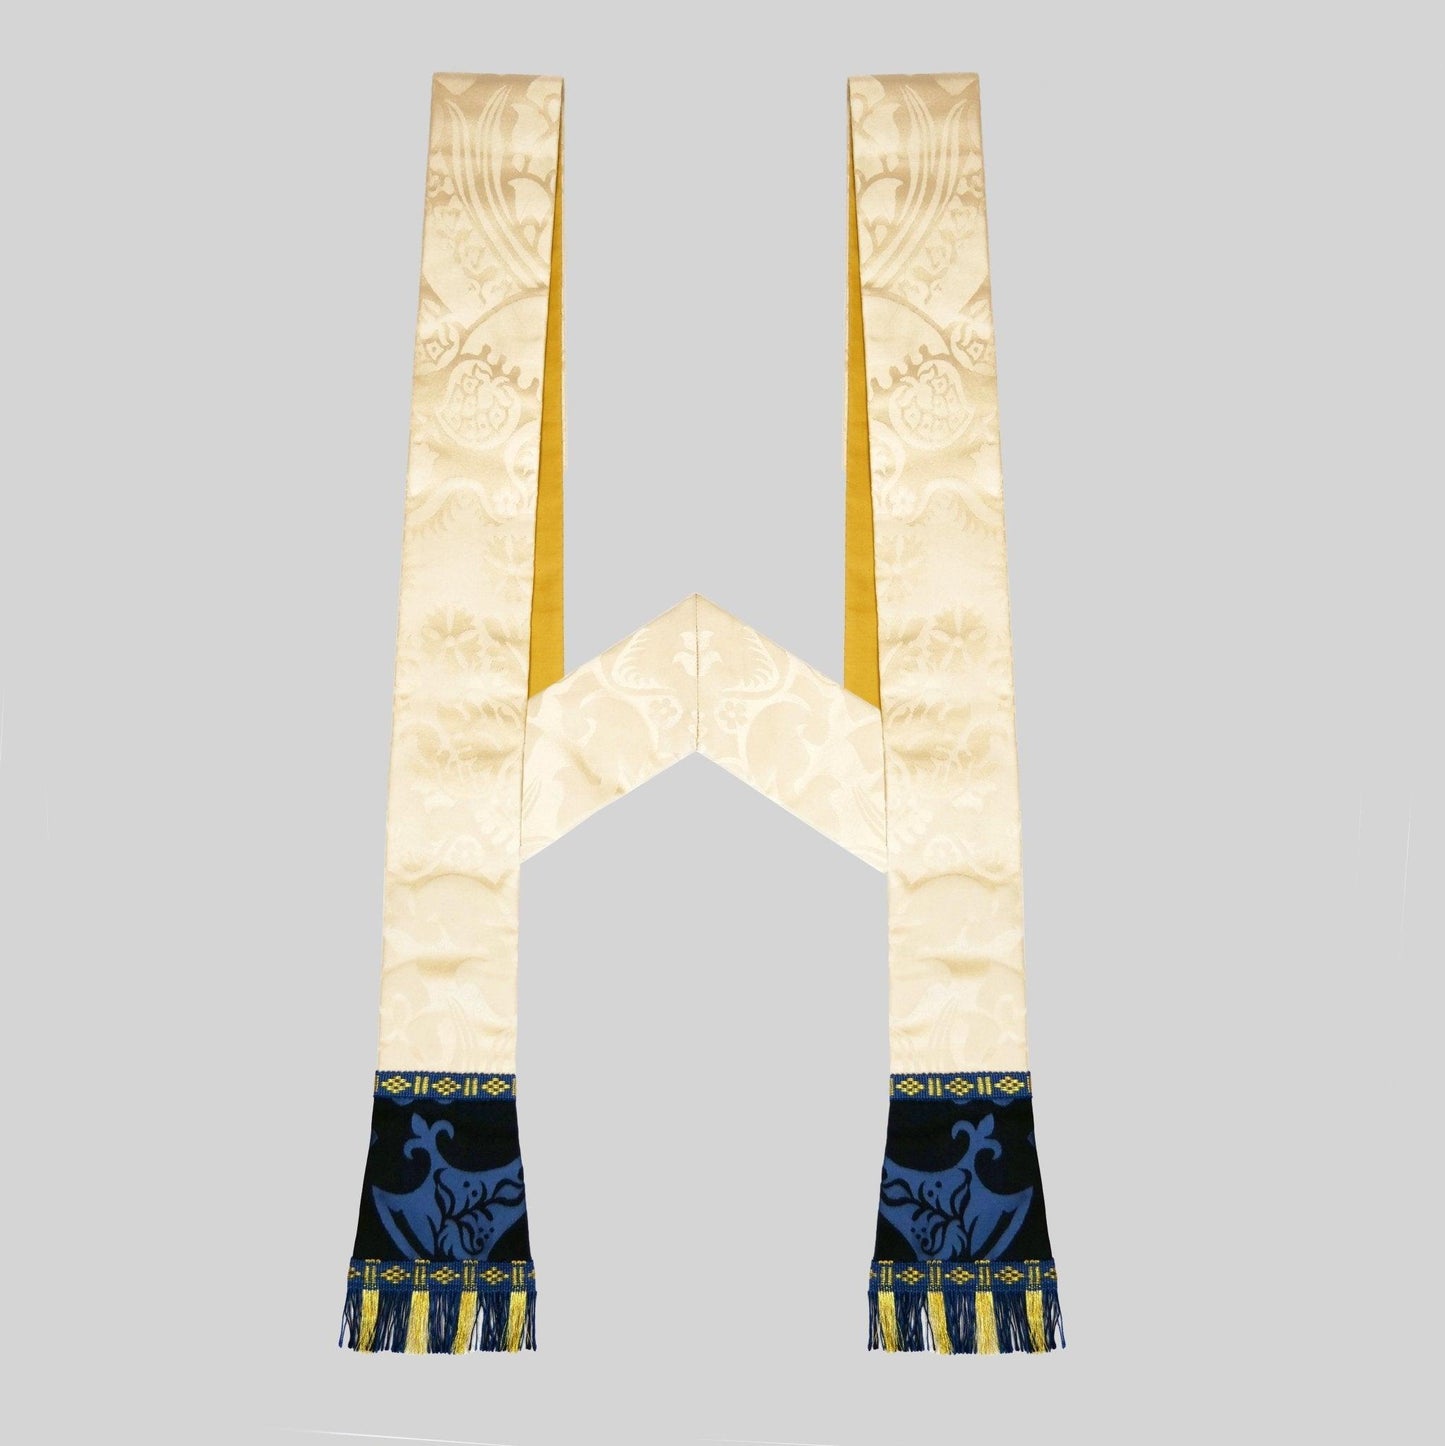 Full Gothic Chasuble & Stole in Cream 'Comper Cathedral' with Black/Blue 'Gothic' Orphreys - Watts & Co.